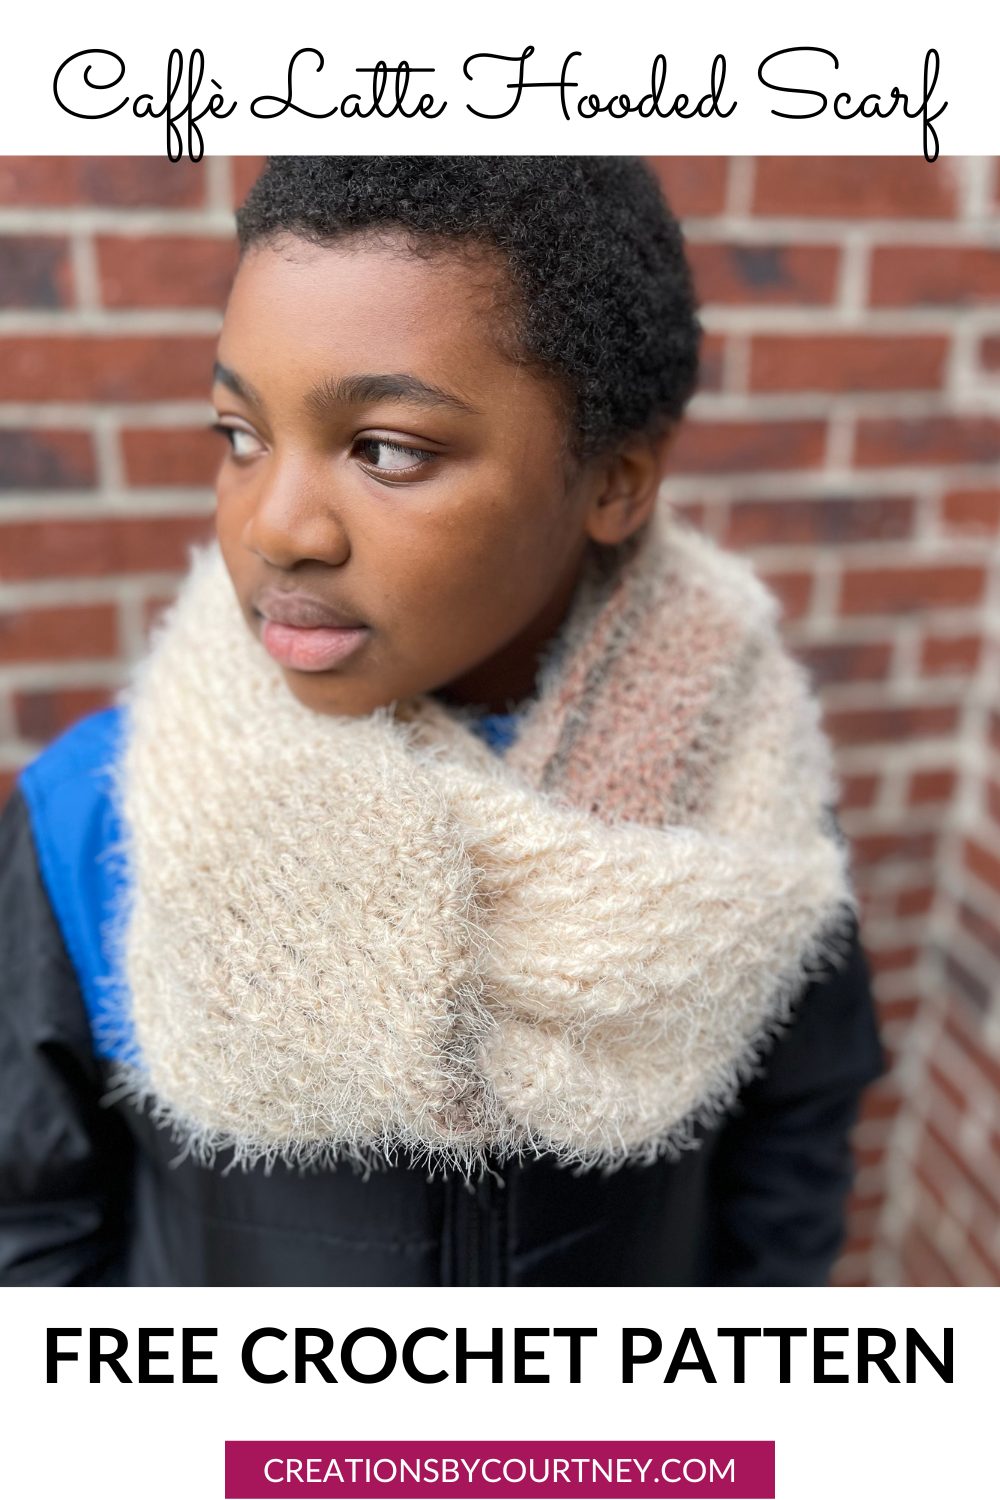 An image of a male child wearing a crochet scarf. The crochet scarf has texture created from post stitches and made in a yarn with multiple natural colors and a fuzzy, soft halo.